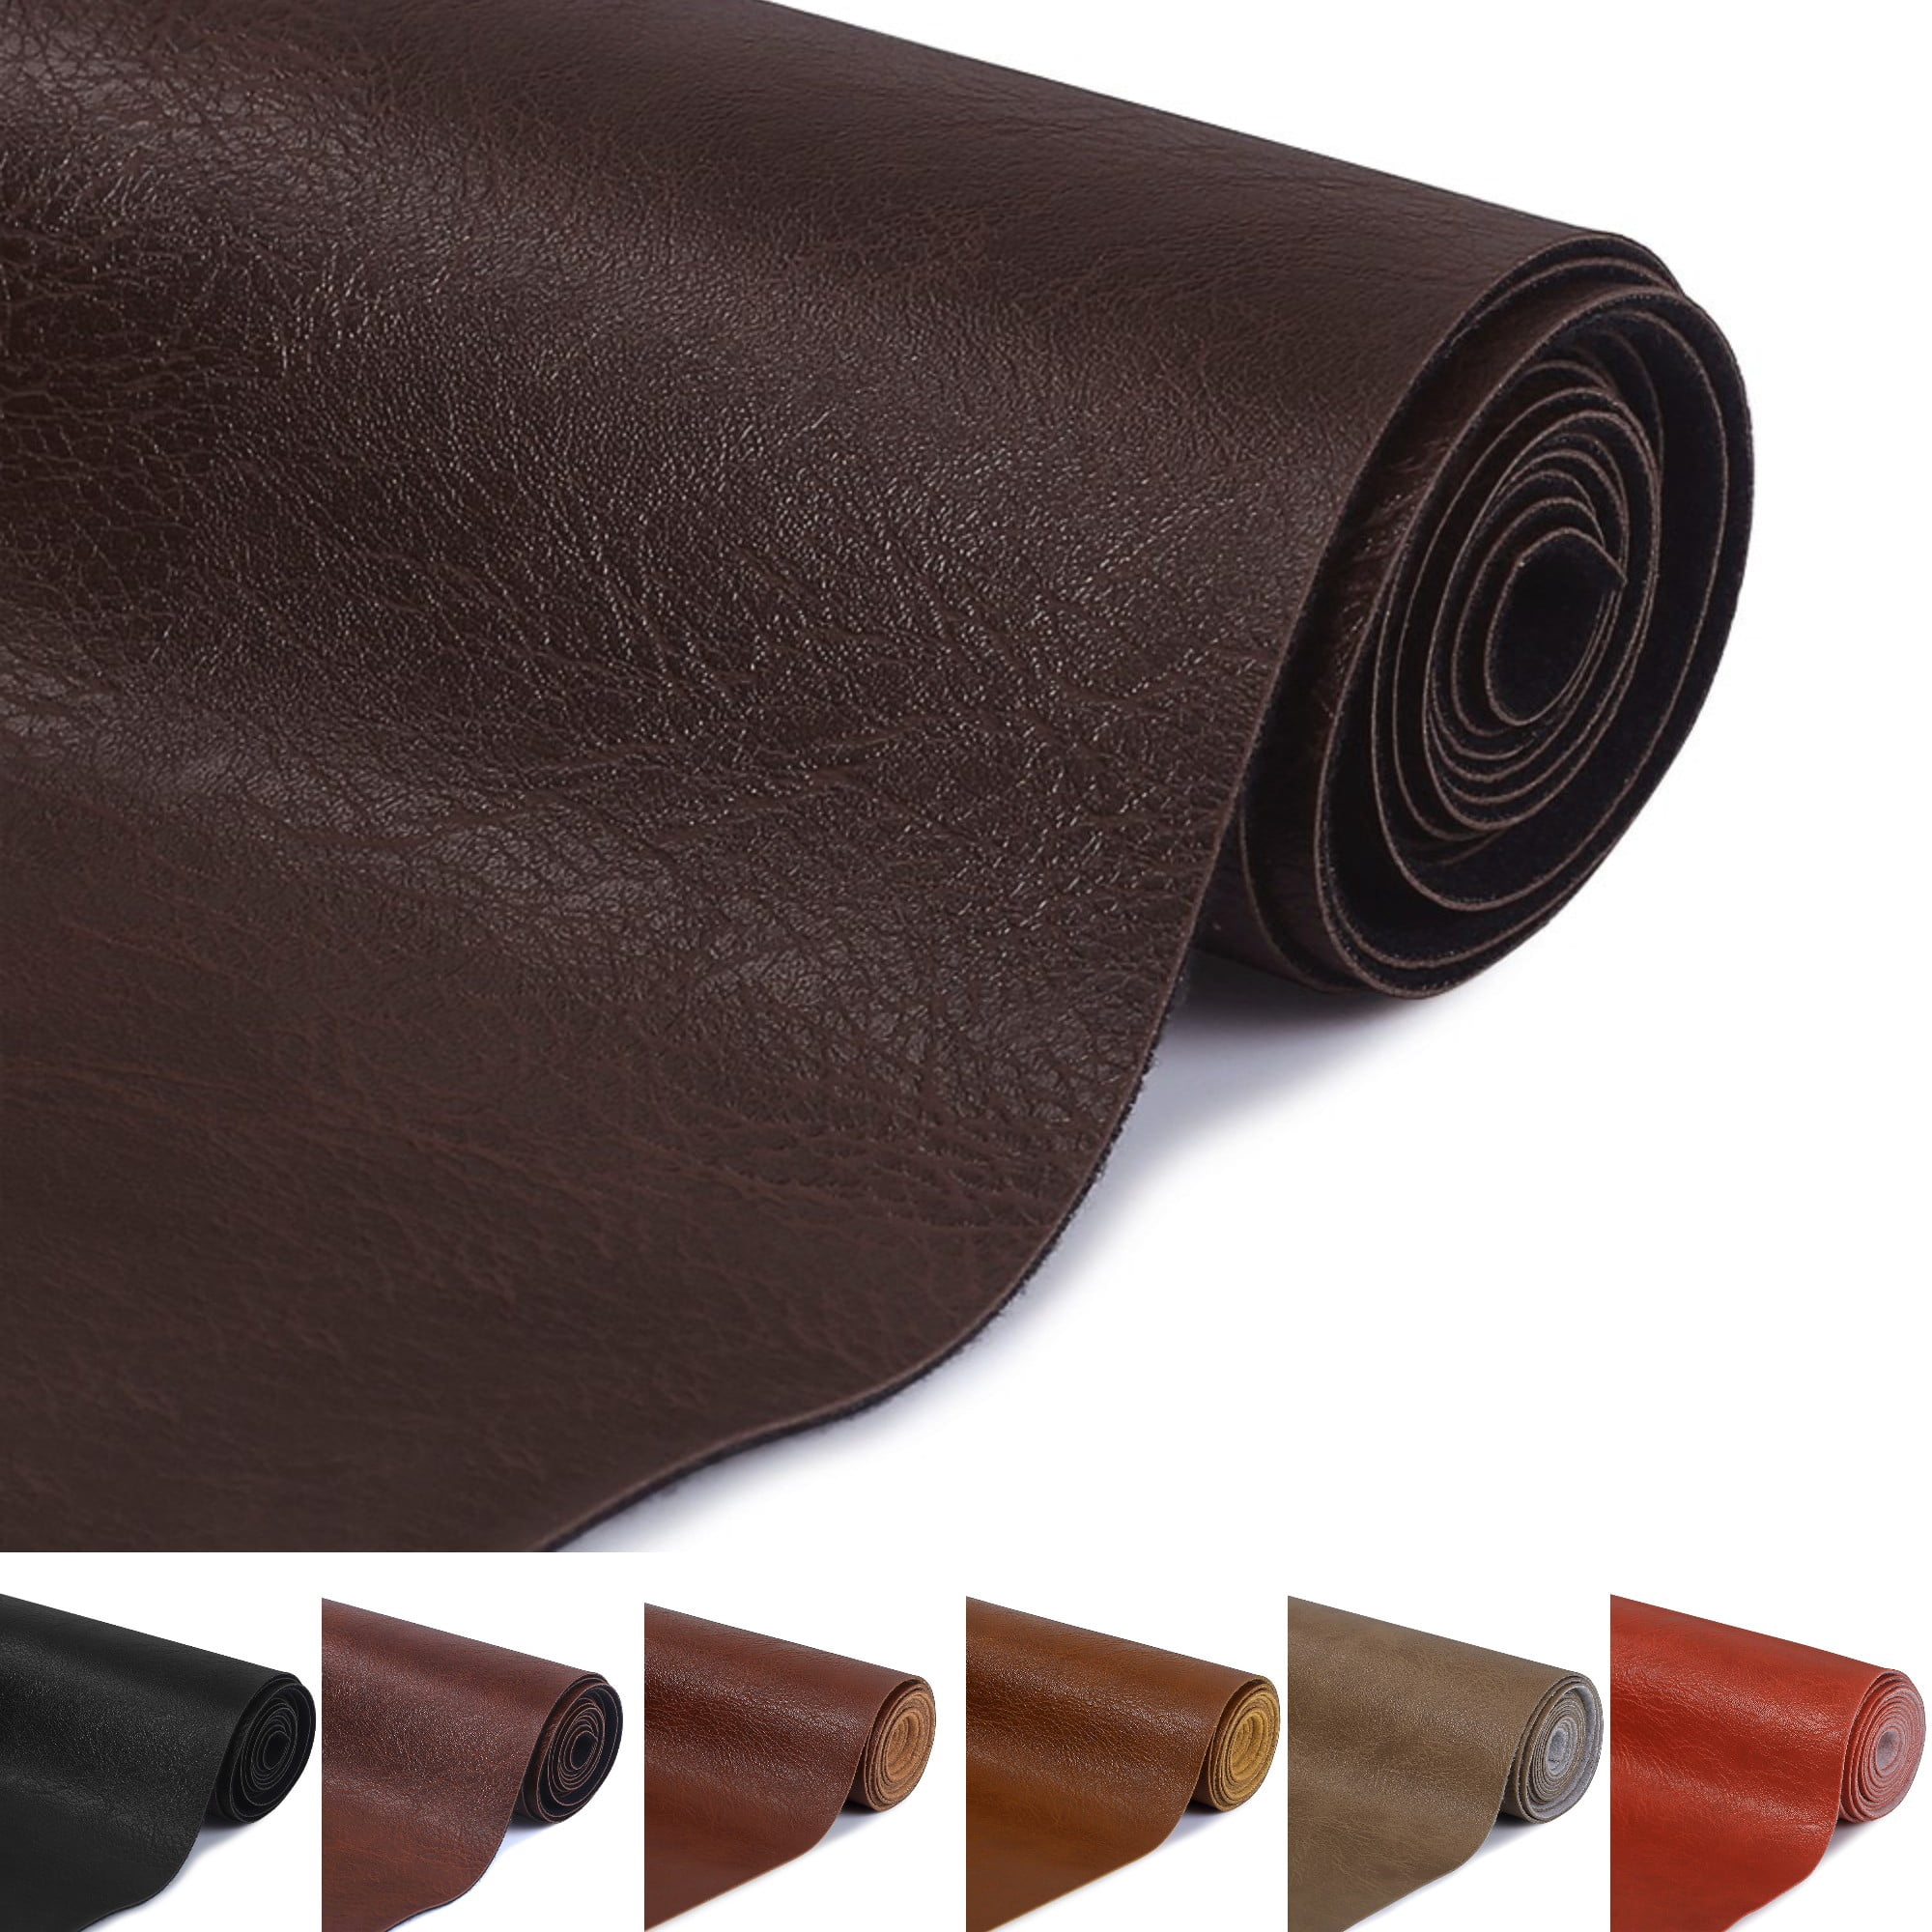 Heavy Duty Marine Grade Vinyl Fabric Faux Leather Fabric Boat Auto  Upholstery 54 Wide By the Yard 